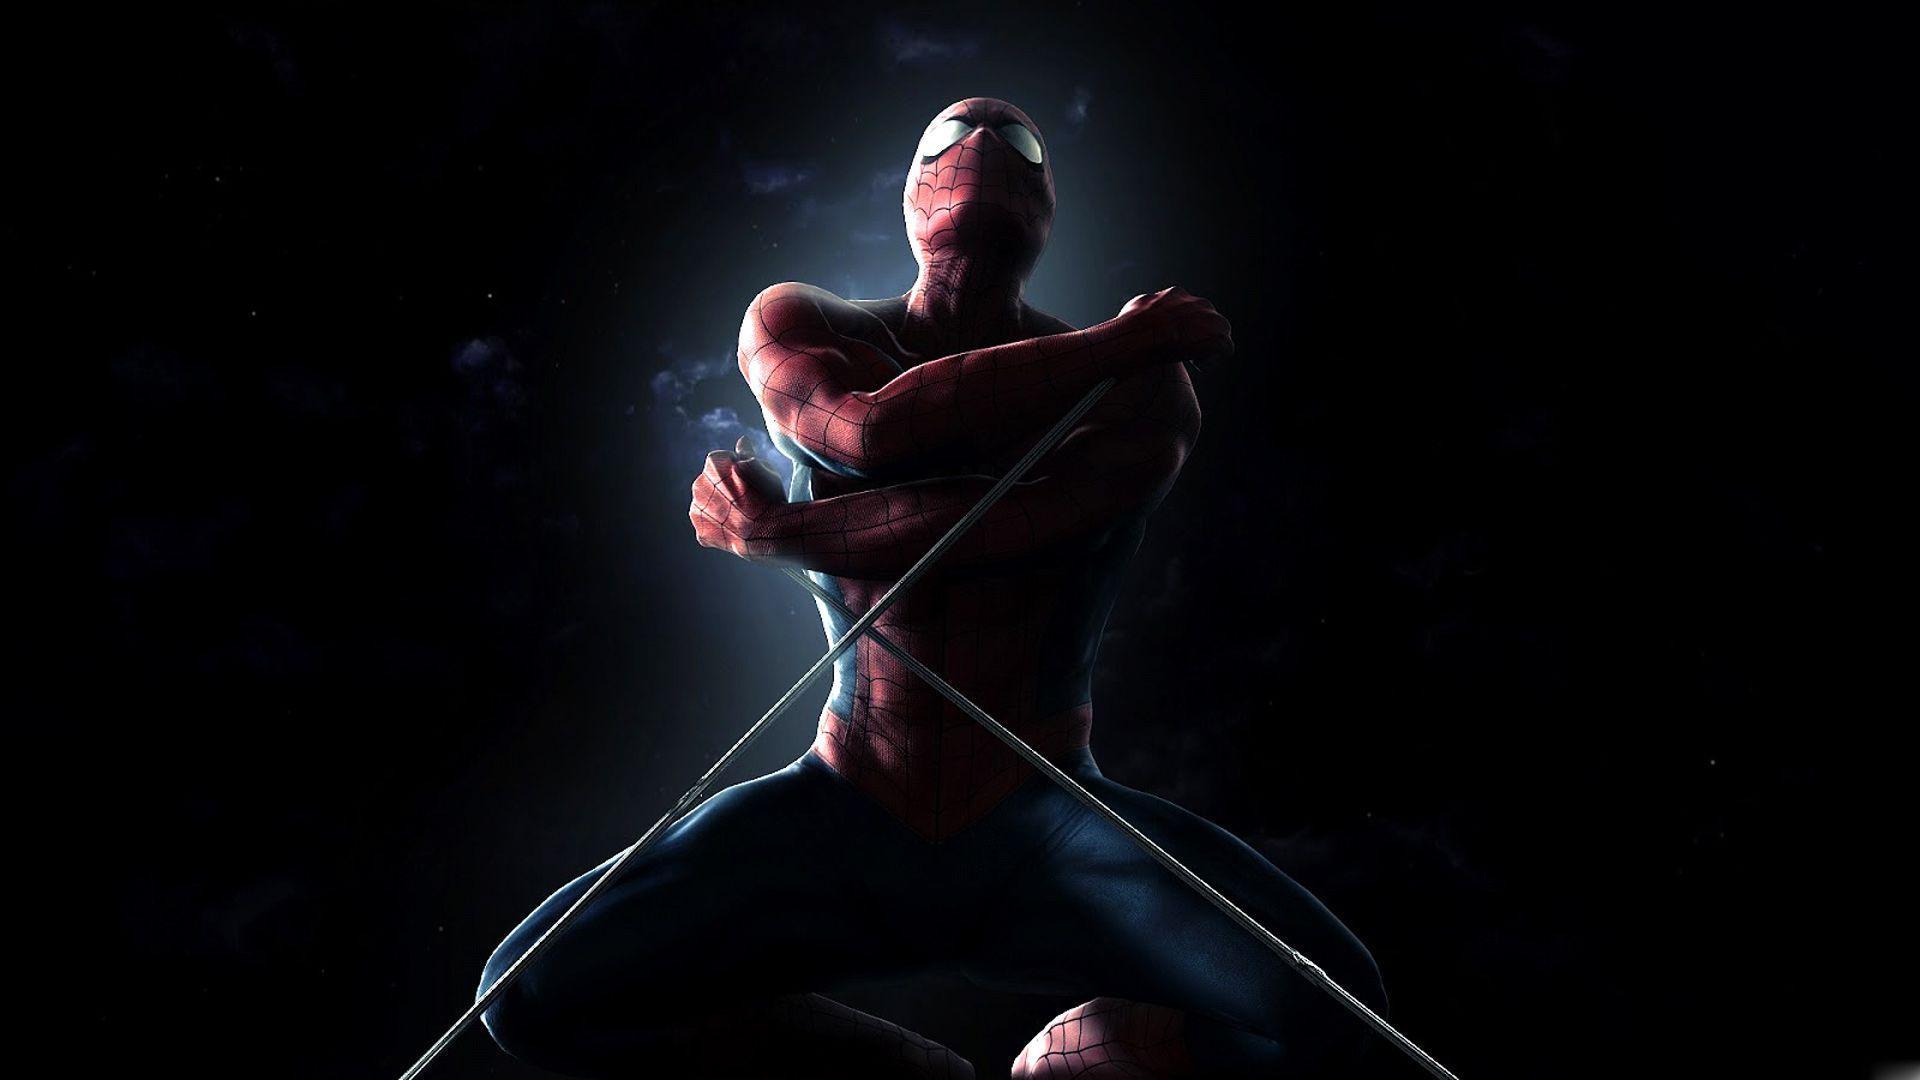 Awesome Spiderman wallpapers